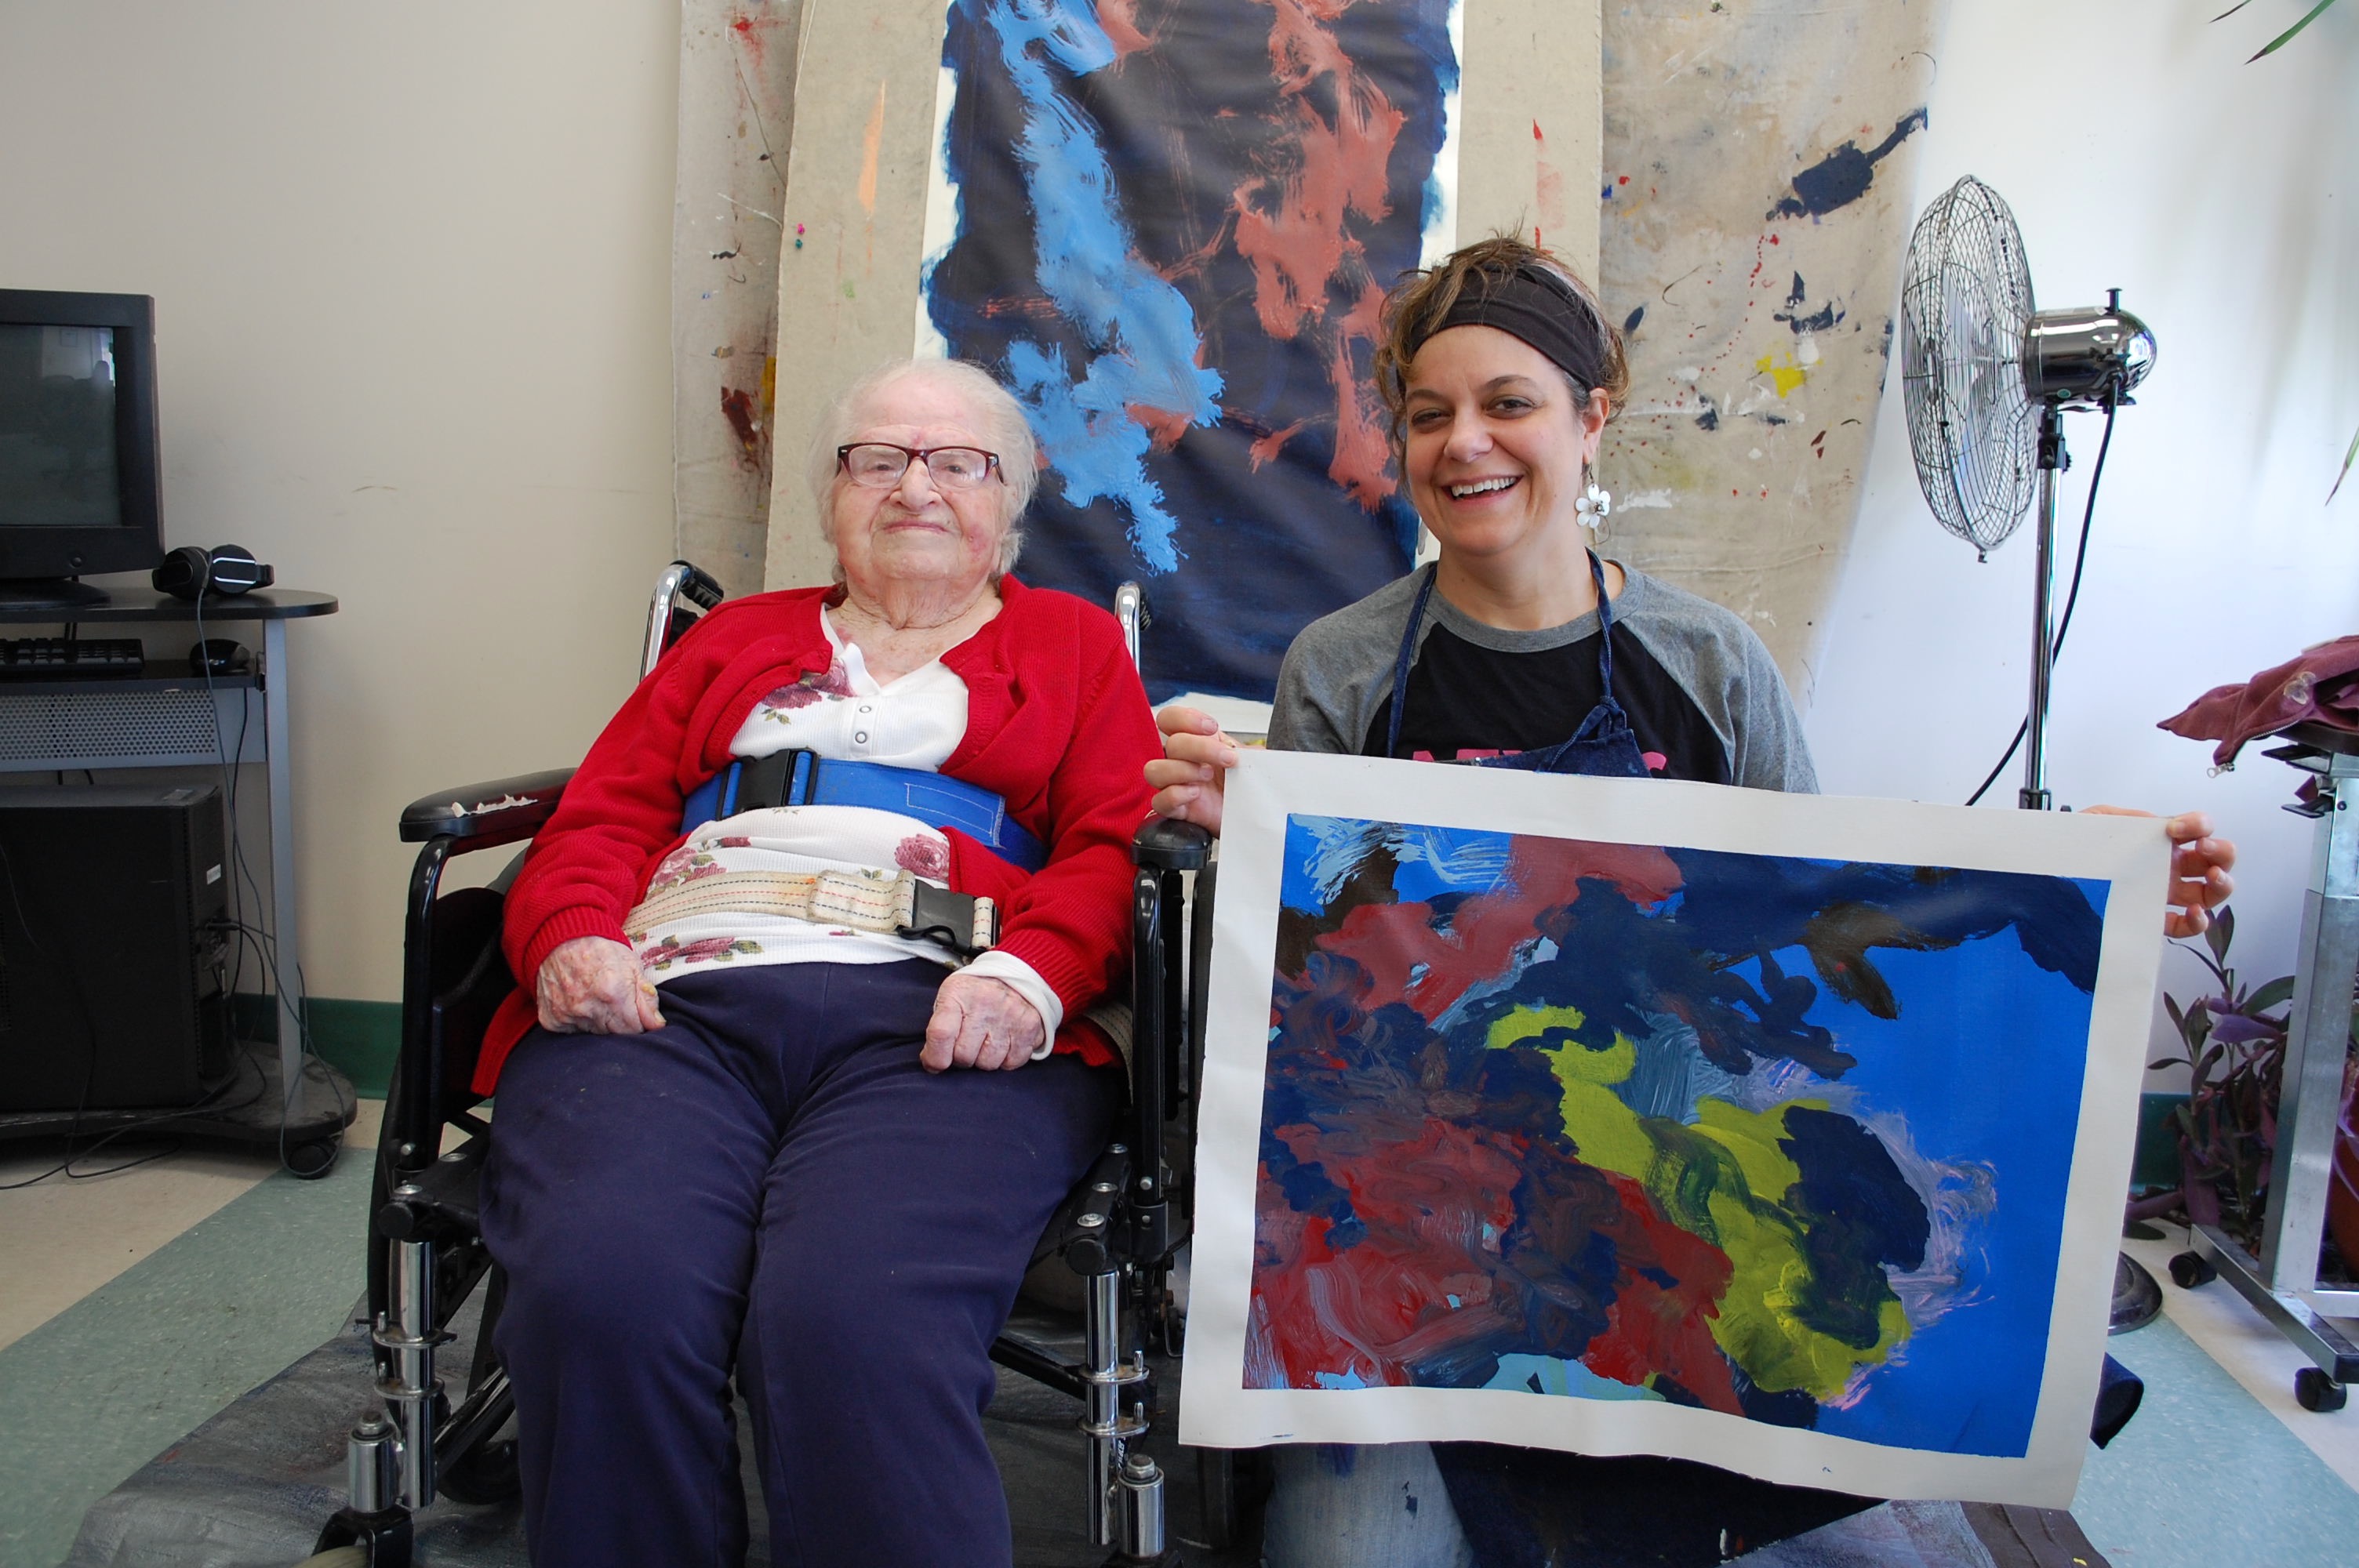 CATA artist Ruthie sits in a wheelchair next to Faculty Artist Stefanie, who holds Ruthie's new painting and smiles. The painting is abstract with broad strokes of red, dark blue, and yellow paint on top of a light blue background.